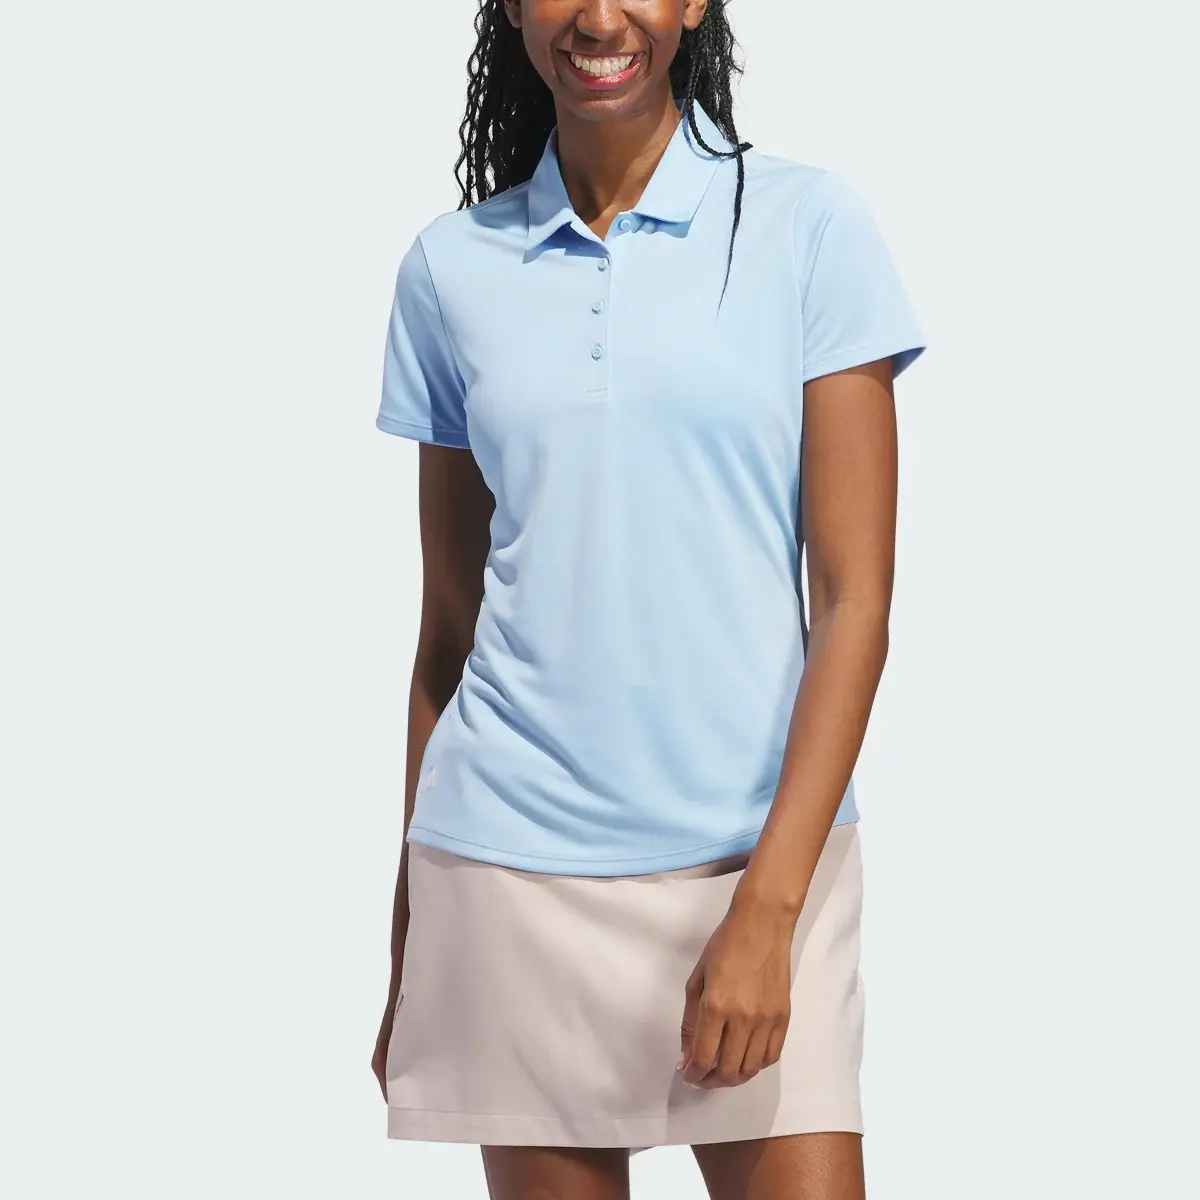 Adidas Polo Solid Performance – Mulher. 1